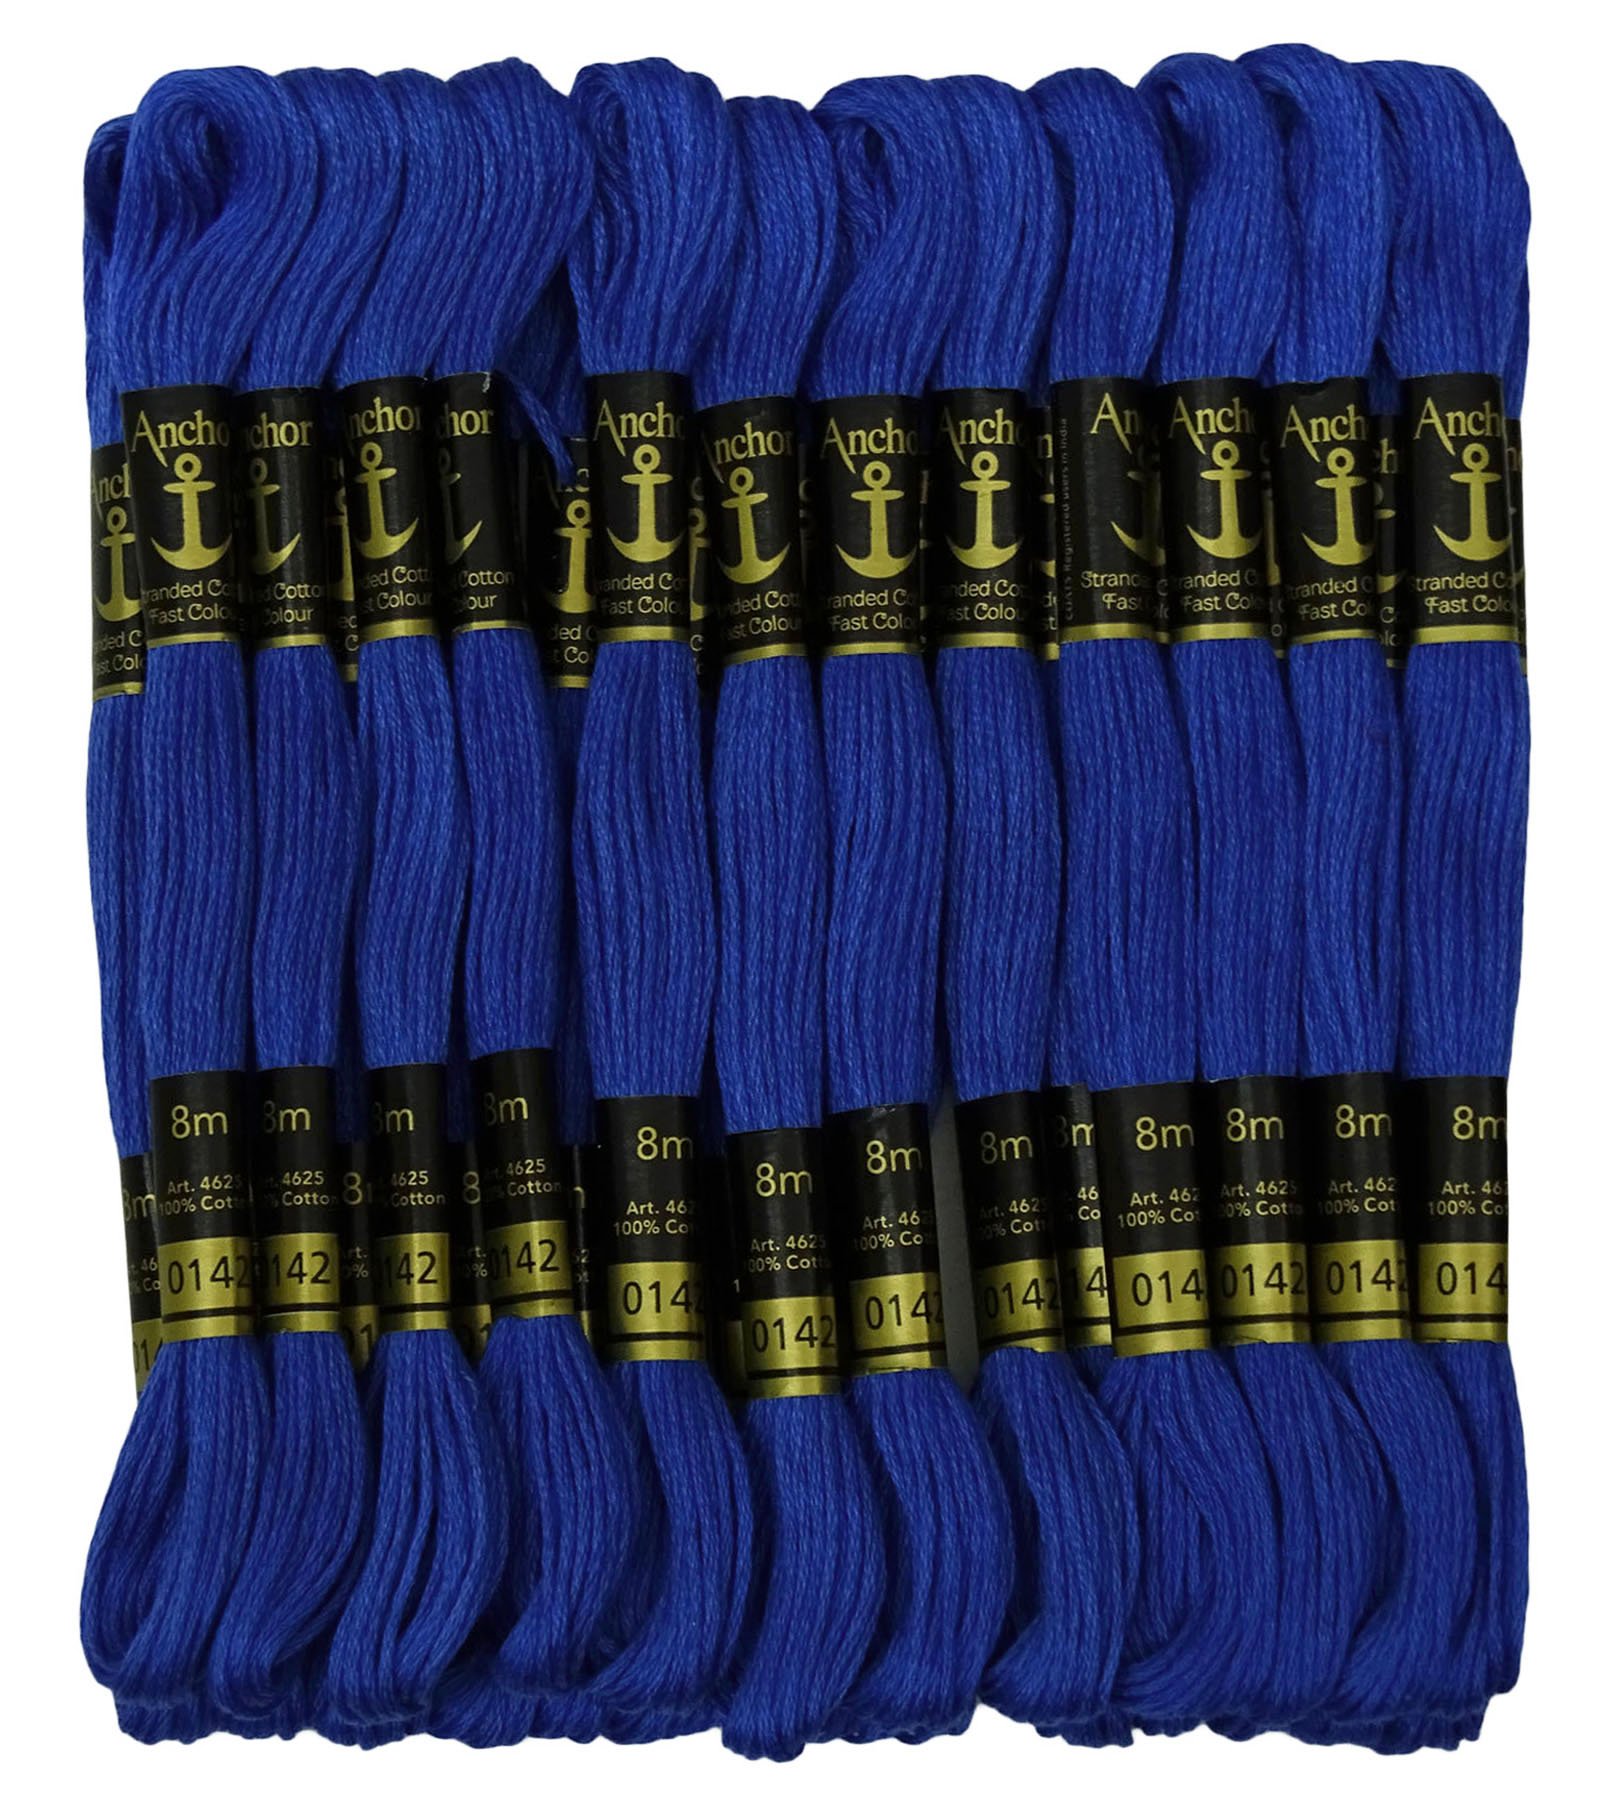 IBA Indianbeautifulart Cross Stitch Hand Embroidery Thread Stranded Cotton Craft Sewing Floss 25 Skeins-Royal Blue